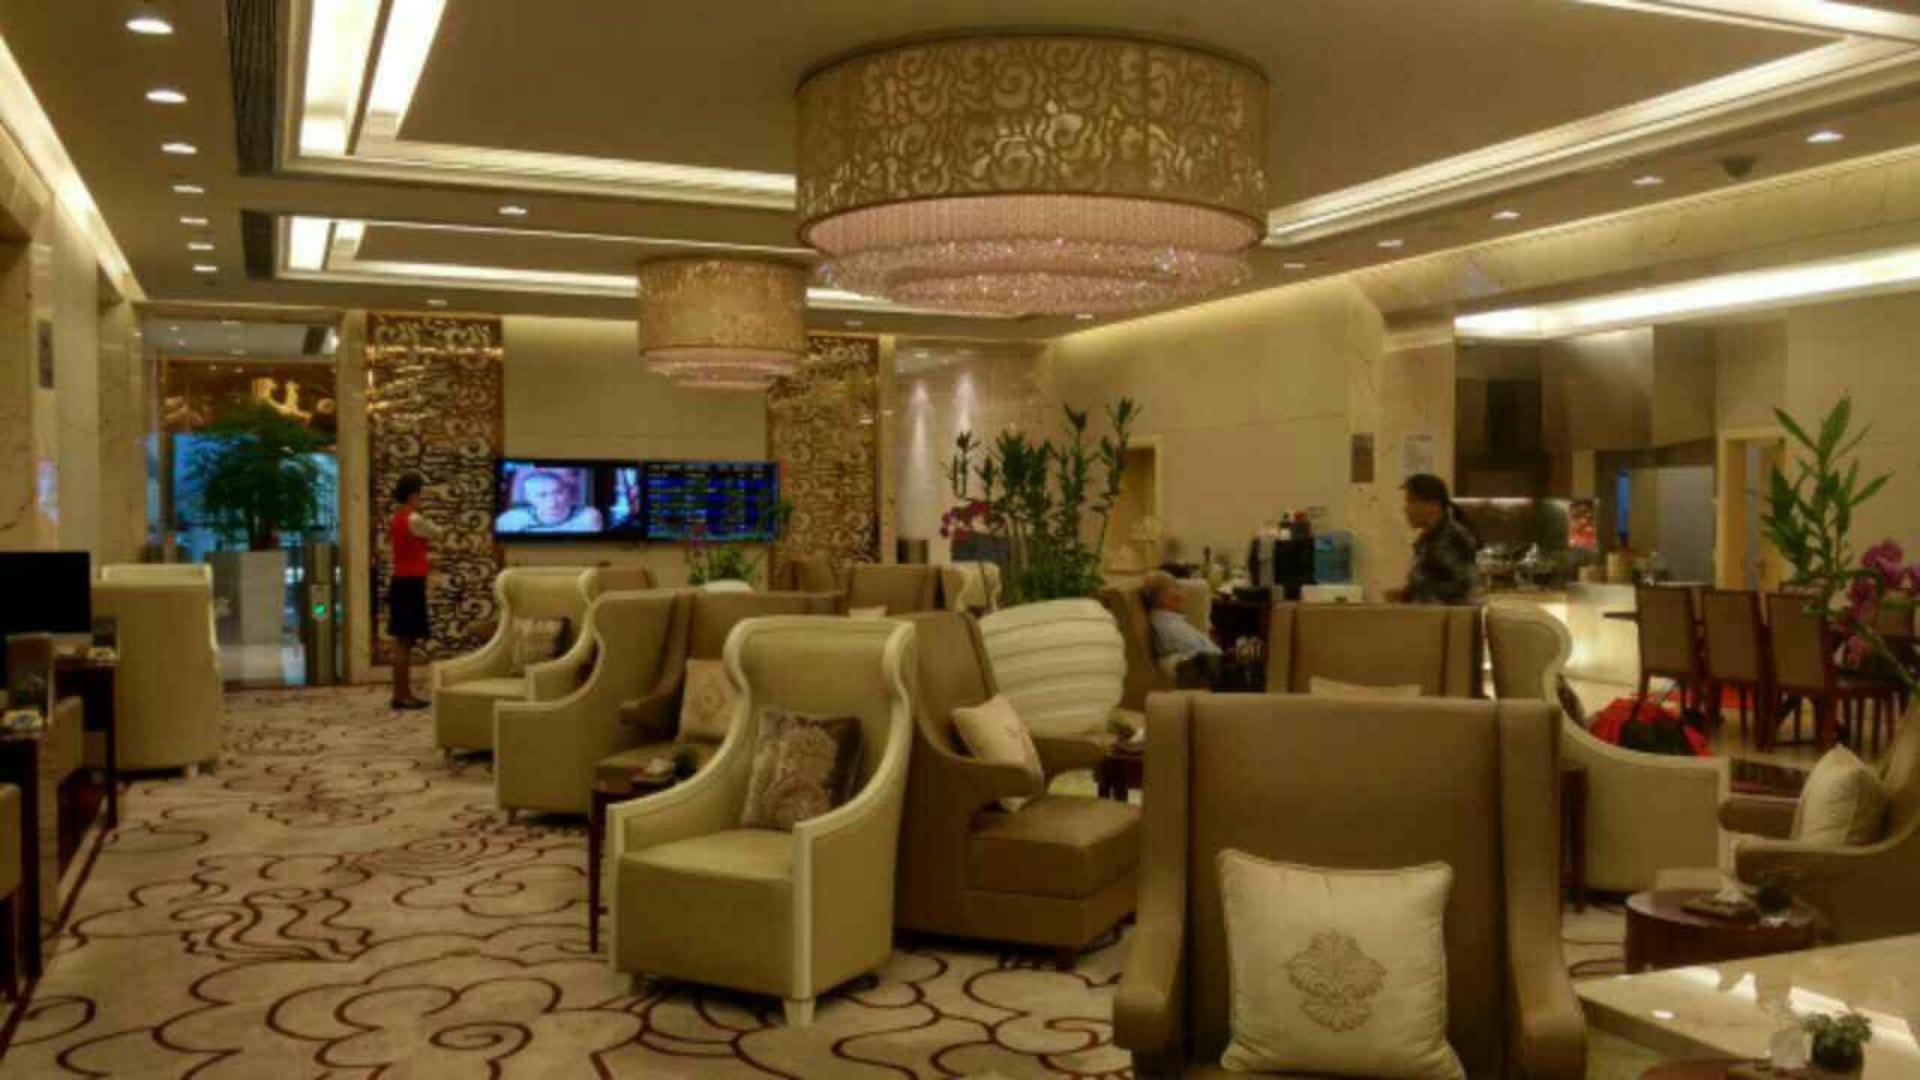 Shenzhen Airlines King Lounge Hall 3 image 1 of 1